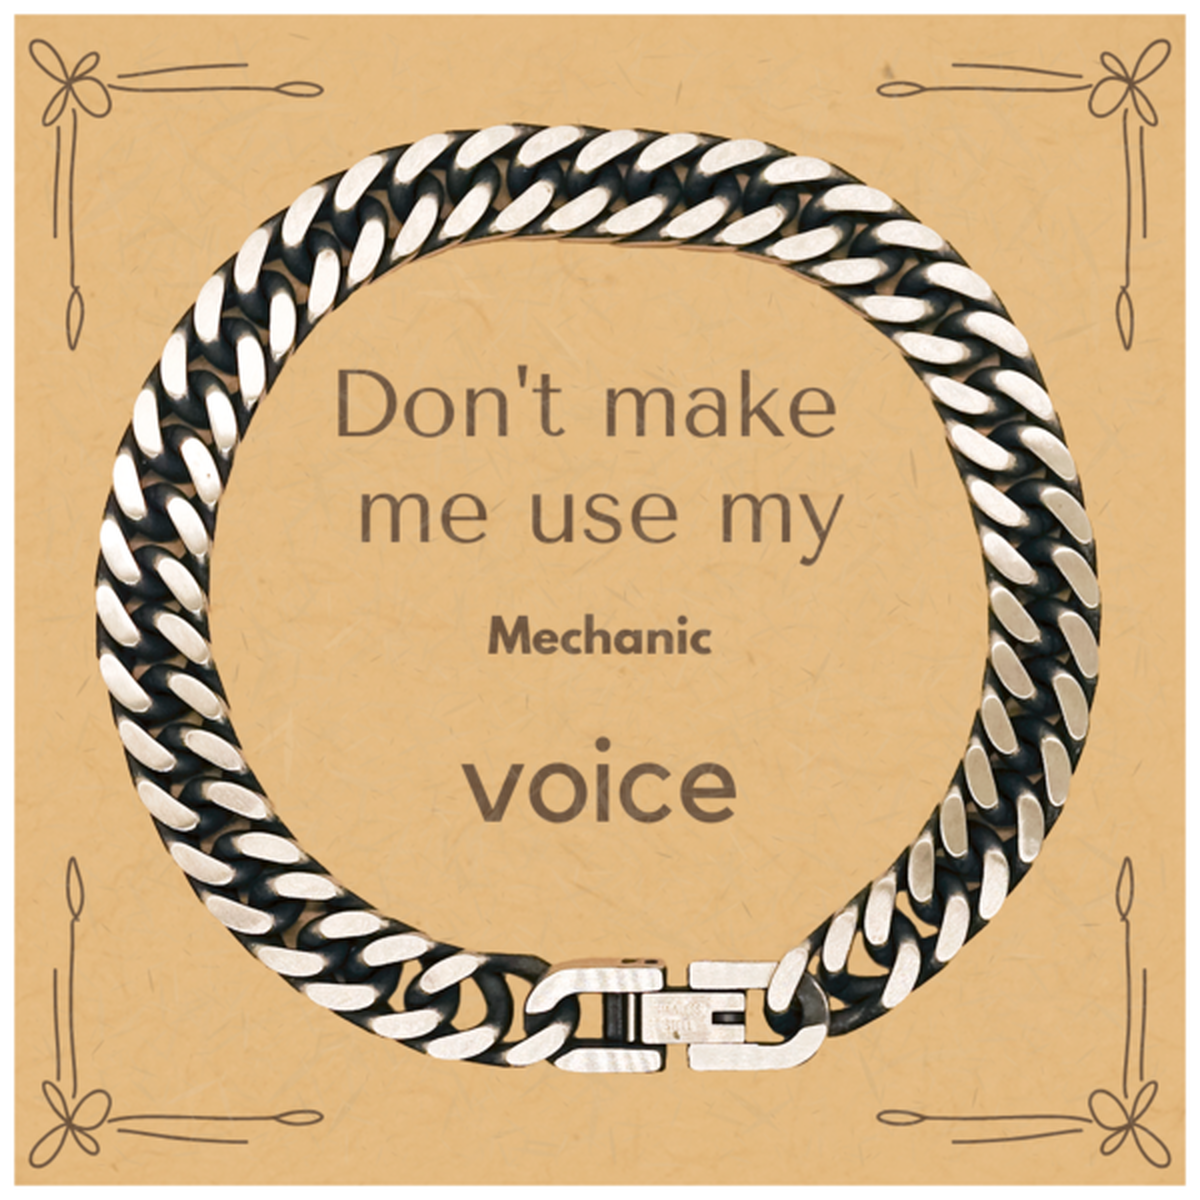 Don't make me use my Mechanic voice, Sarcasm Mechanic Card Gifts, Christmas Mechanic Cuban Link Chain Bracelet Birthday Unique Gifts For Mechanic Coworkers, Men, Women, Colleague, Friends